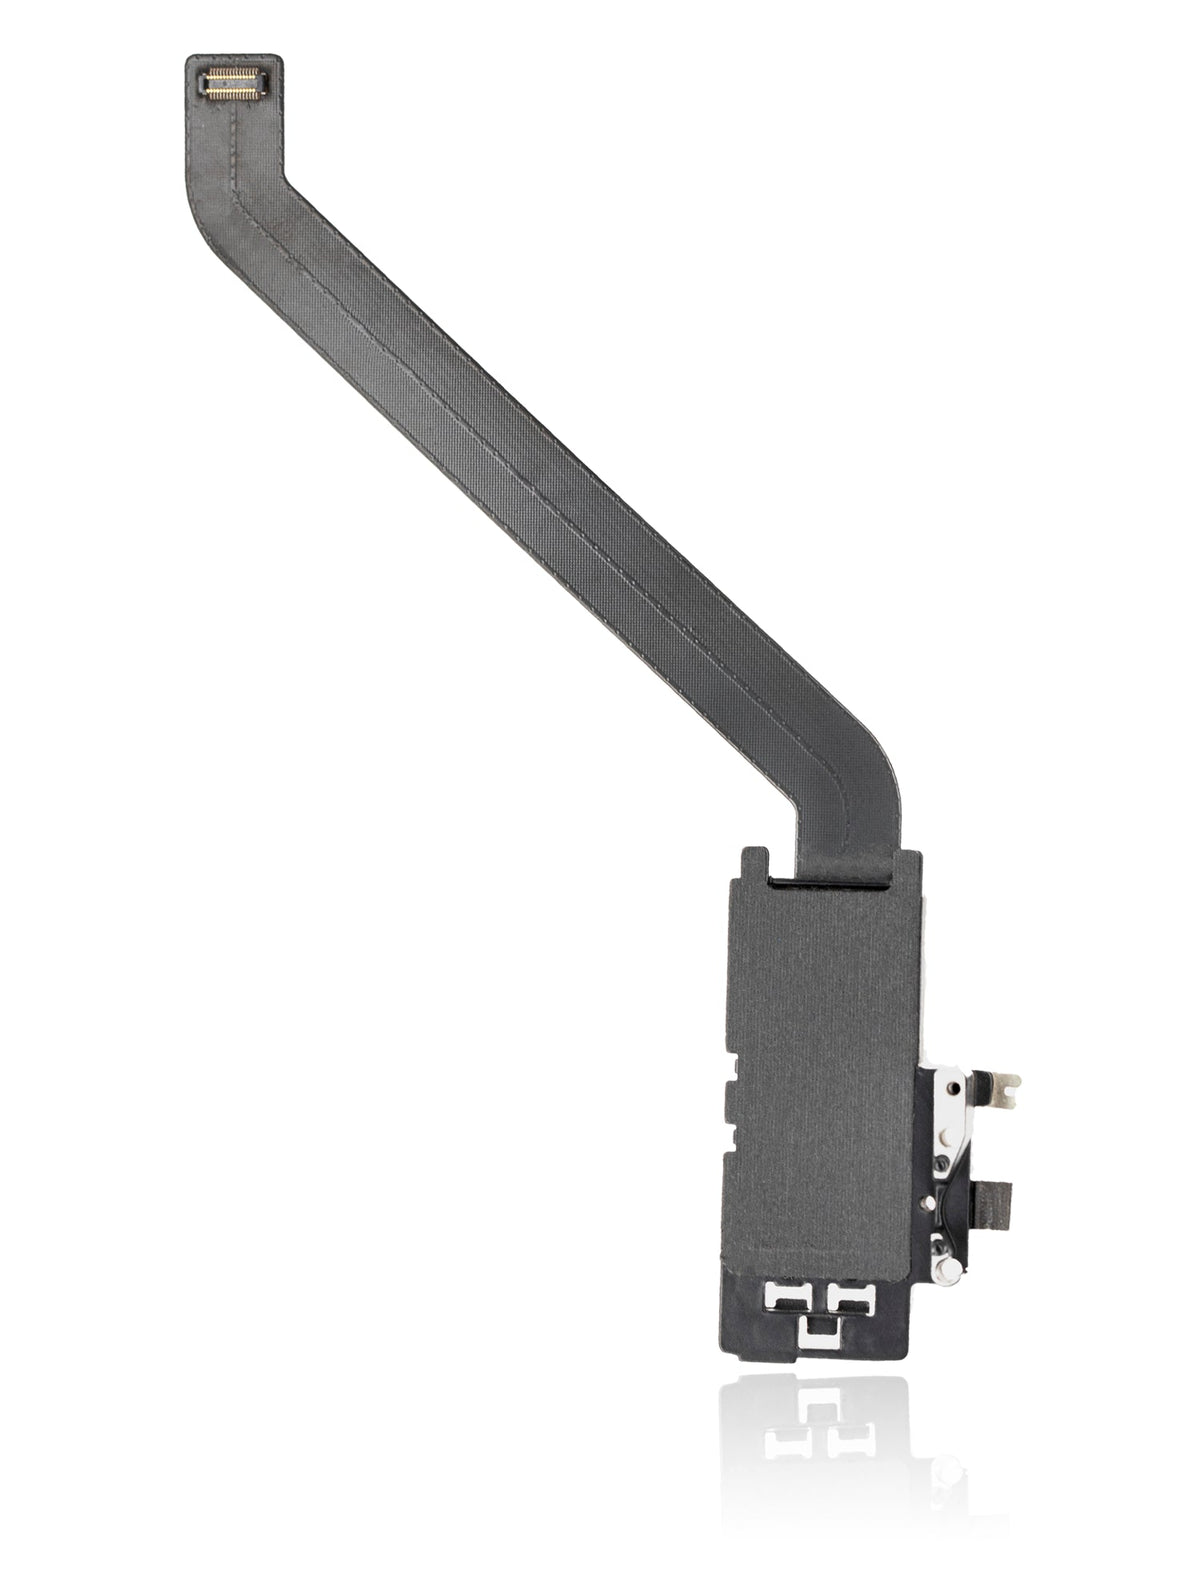 AIRPORT WIRELESS CARD ASSEMBLY  FOR MACBOOK PRO UNIBODY 13" A1278  (EARLY 2011 / LATE 2011 / MID 2012)